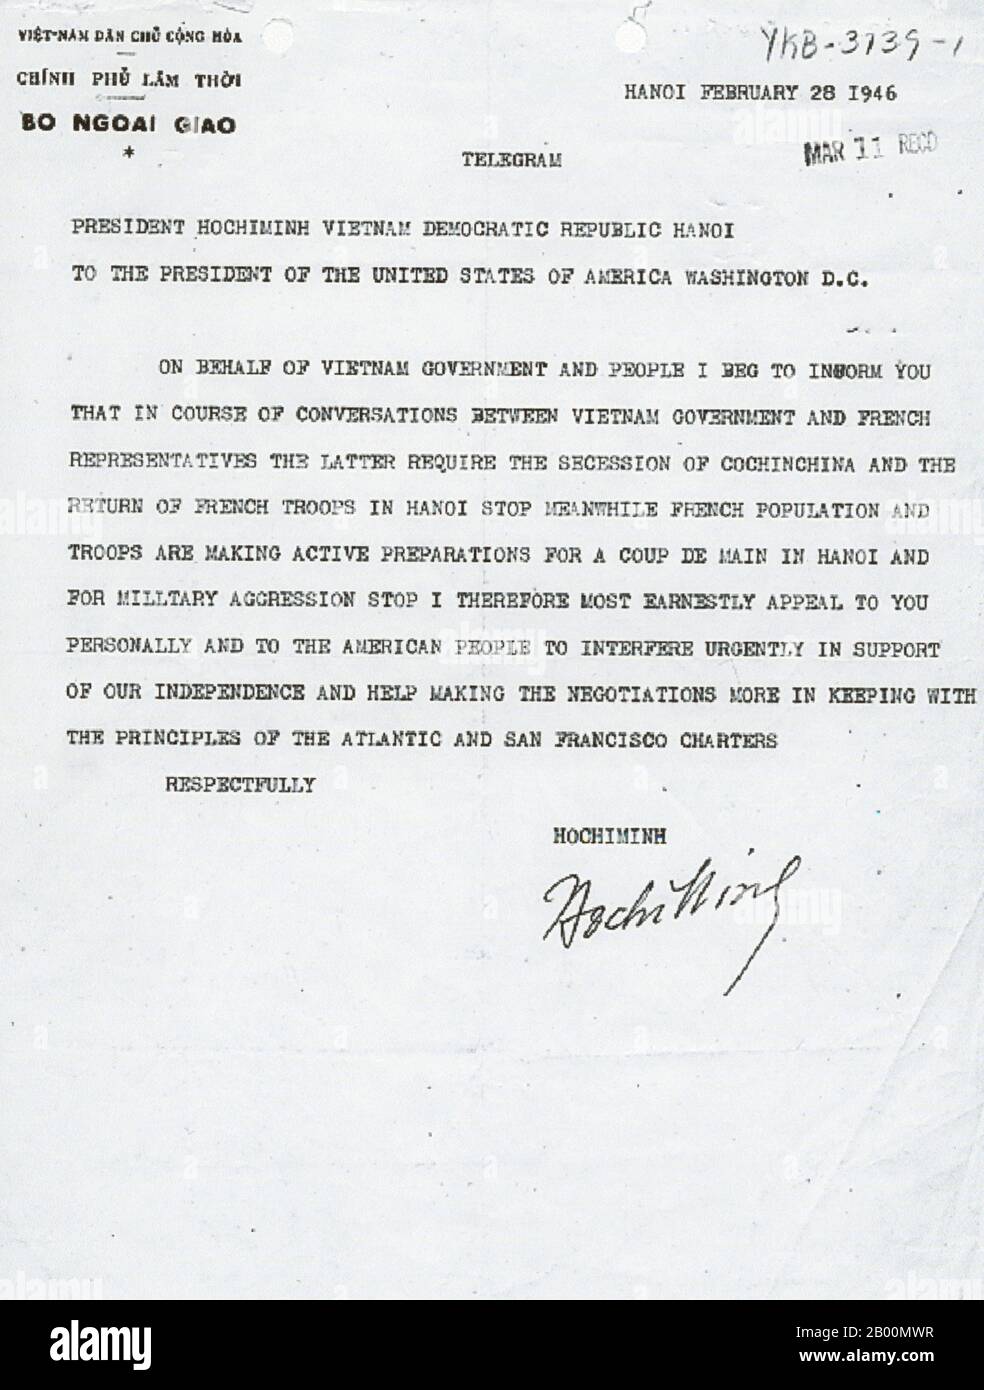 Vietnam: Telegram from Ho Chi Minh to President Truman dated February 28, 1946.  The Second Indochina War, known in America as the Vietnam War, was a Cold War era military conflict that occurred in Vietnam, Laos, and Cambodia from 1 November 1955 to the fall of Saigon on 30 April 1975. This war followed the First Indochina War and was fought between North Vietnam, supported by its communist allies, and the government of South Vietnam, supported by the U.S. and other anti-communist nations. Stock Photo